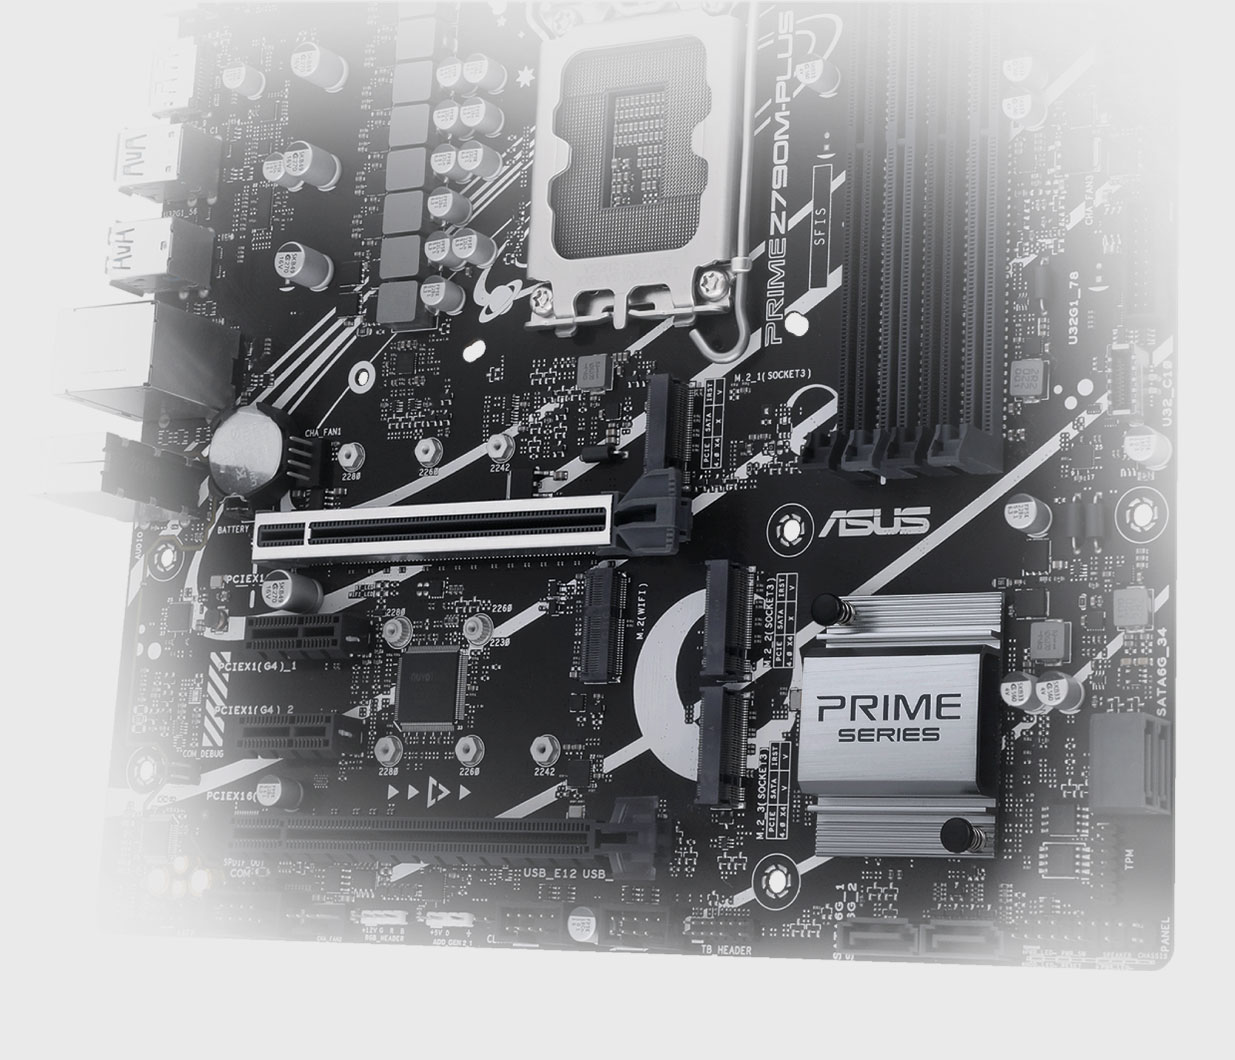 The PRIME Z790M-PLUS D4 motherboard supports three M.2 slots.